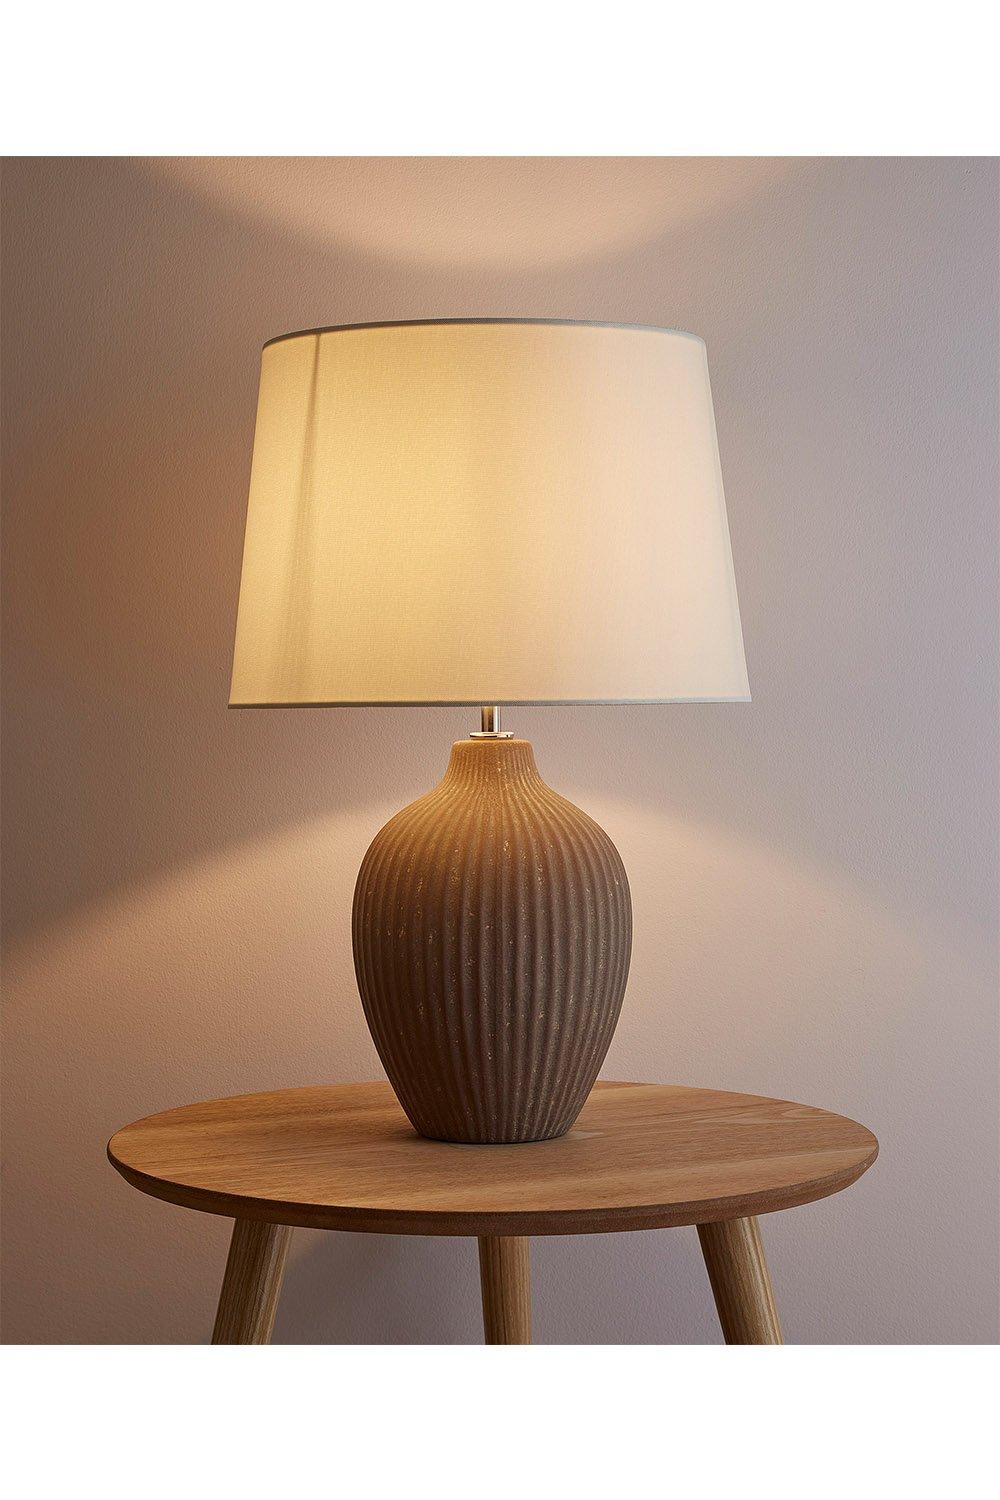 Ceramic Table Lamp with a Brown Textured Base and a Cream Tapered Lamp Shade to Match